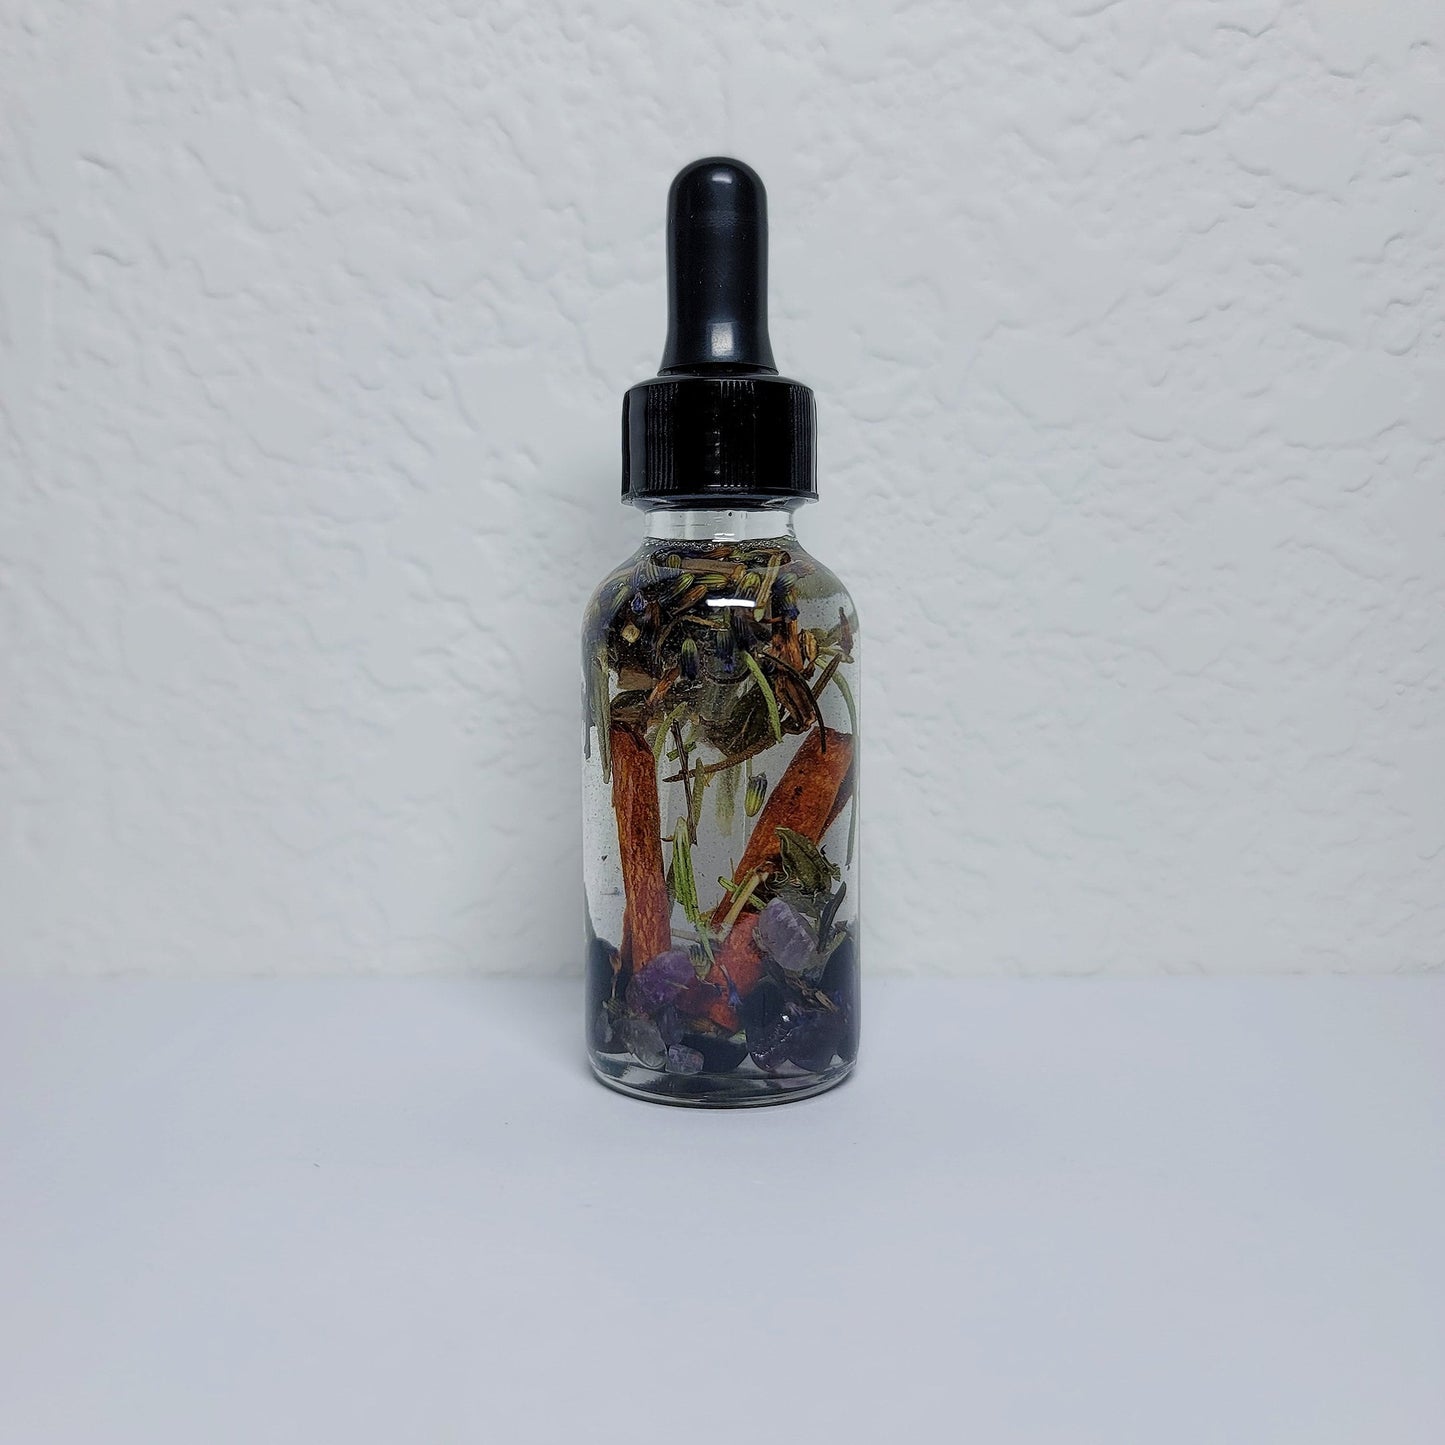 The Morrigan Goddess Oil | Ritual & Spell Work, Altars, Invocation, Manifestation, and Intentions